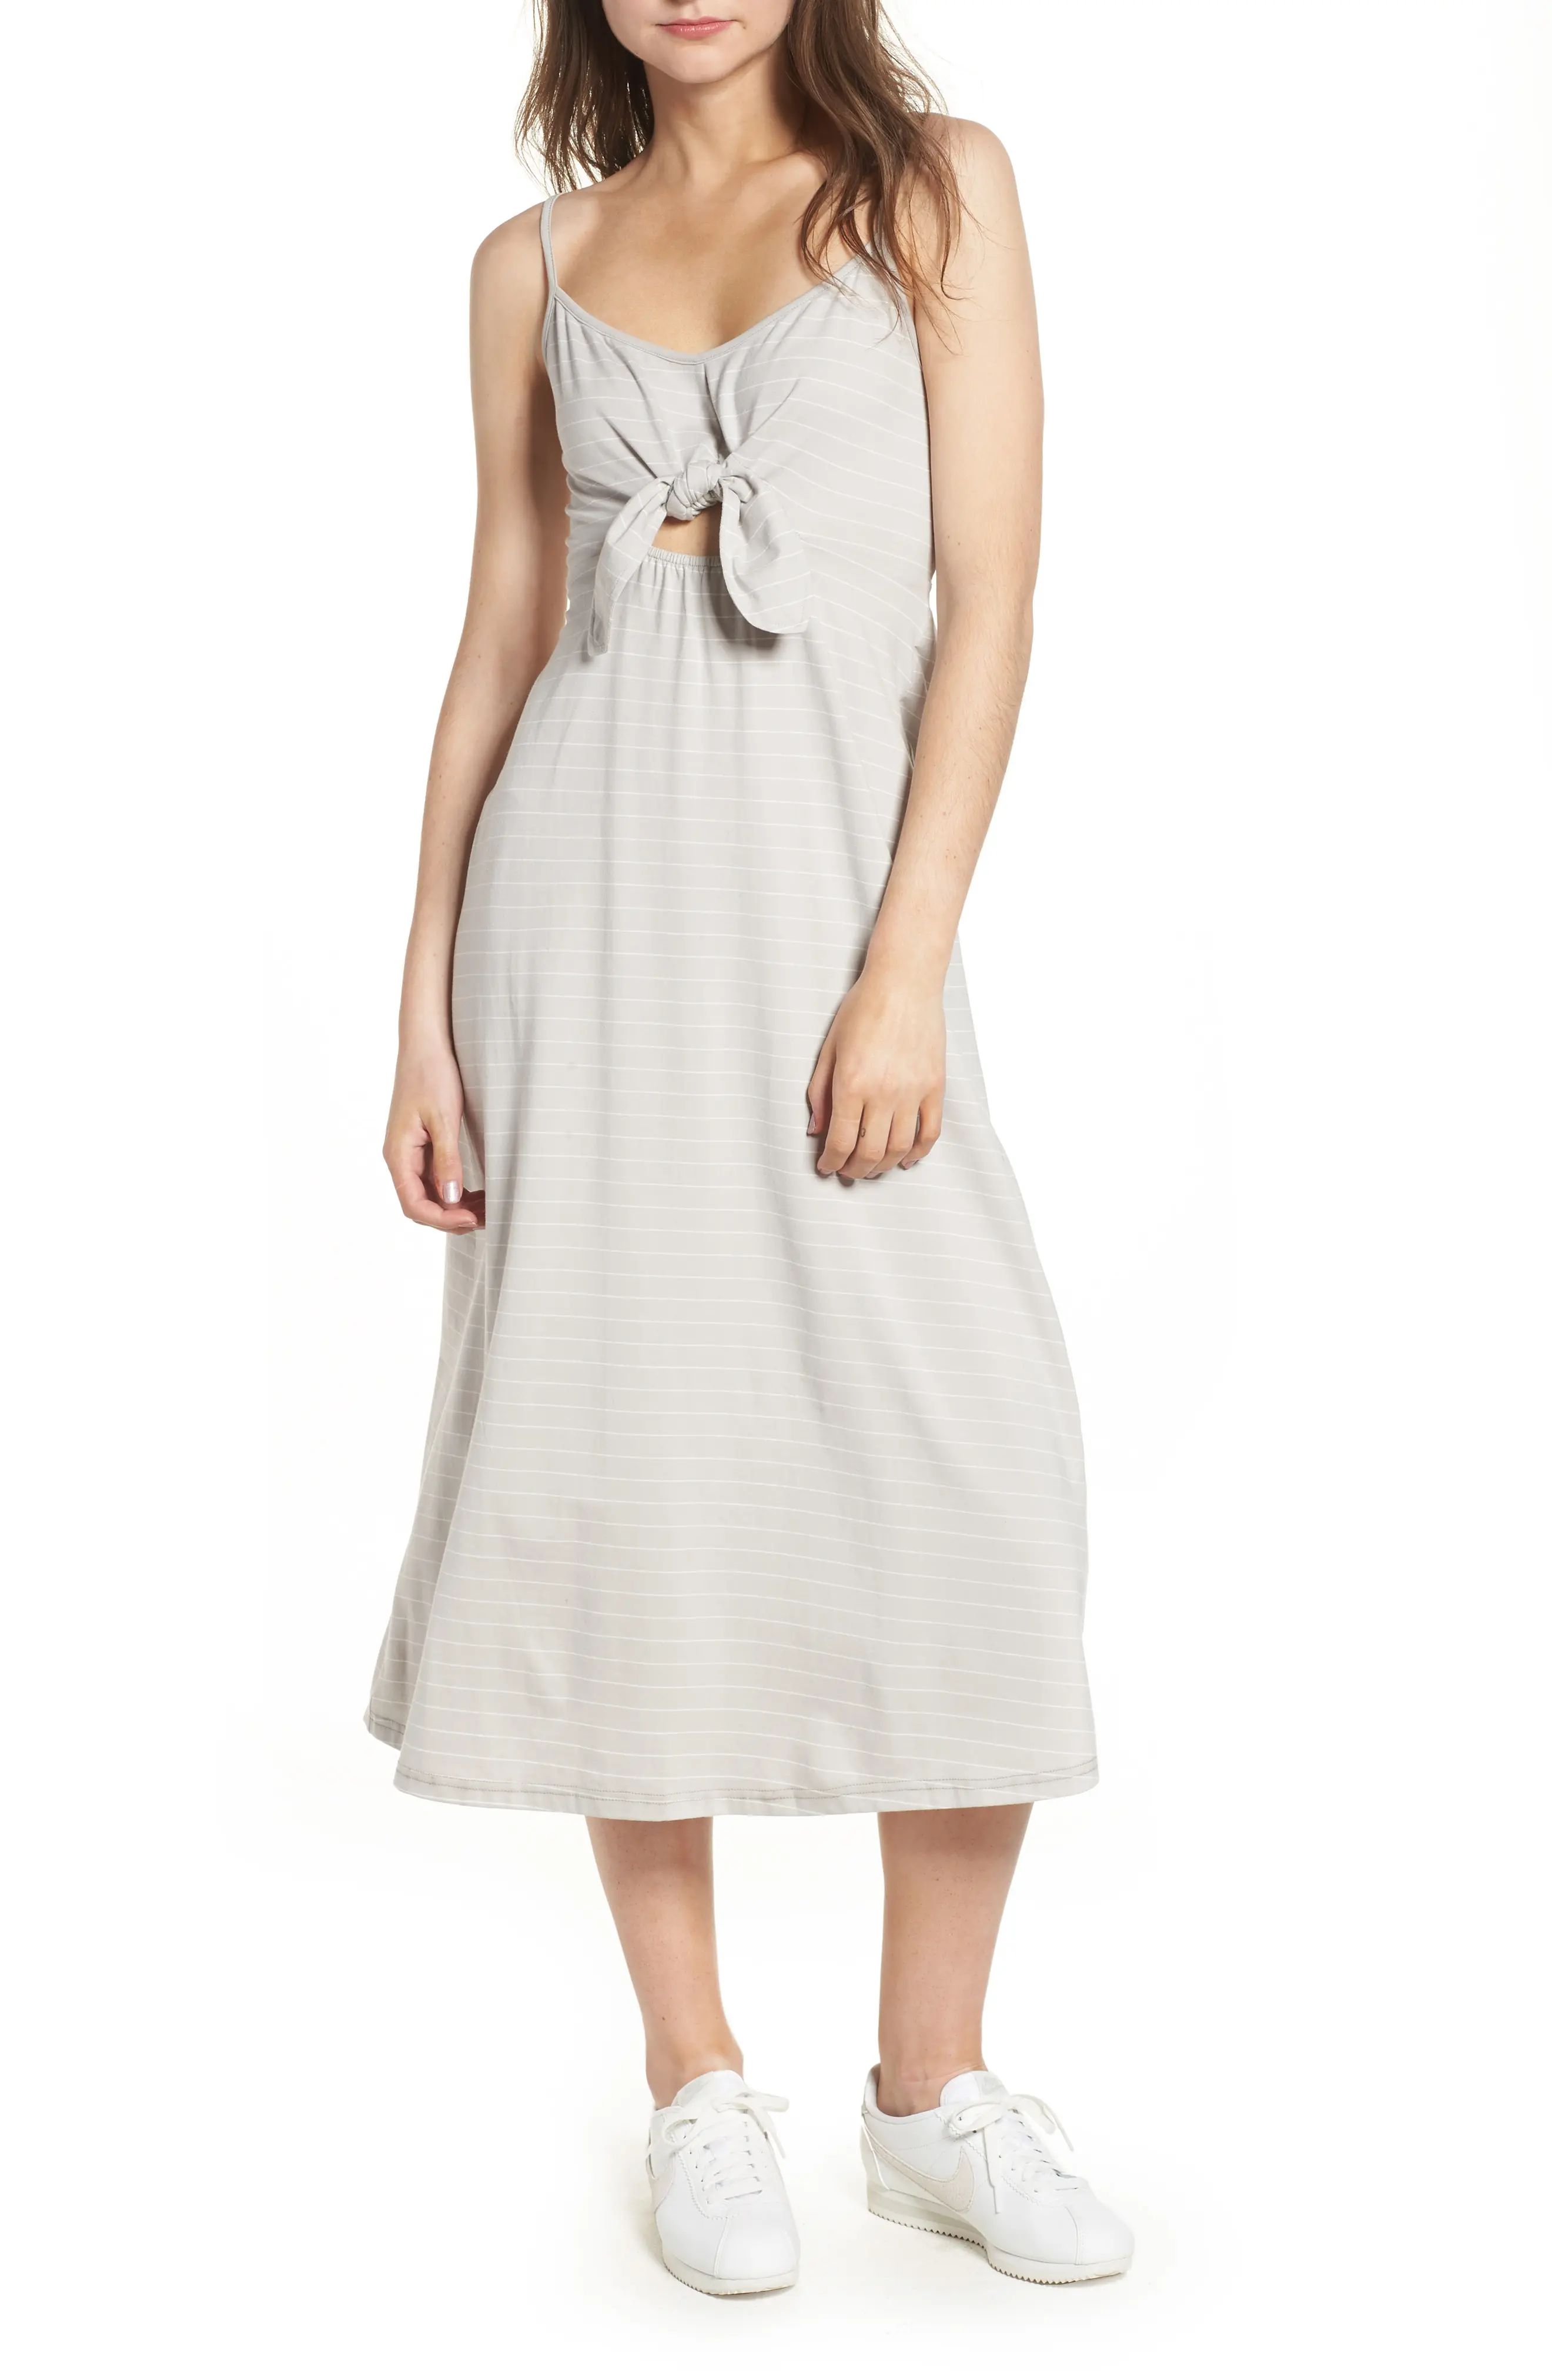 Suzanne Knot Front Dress | Nordstrom